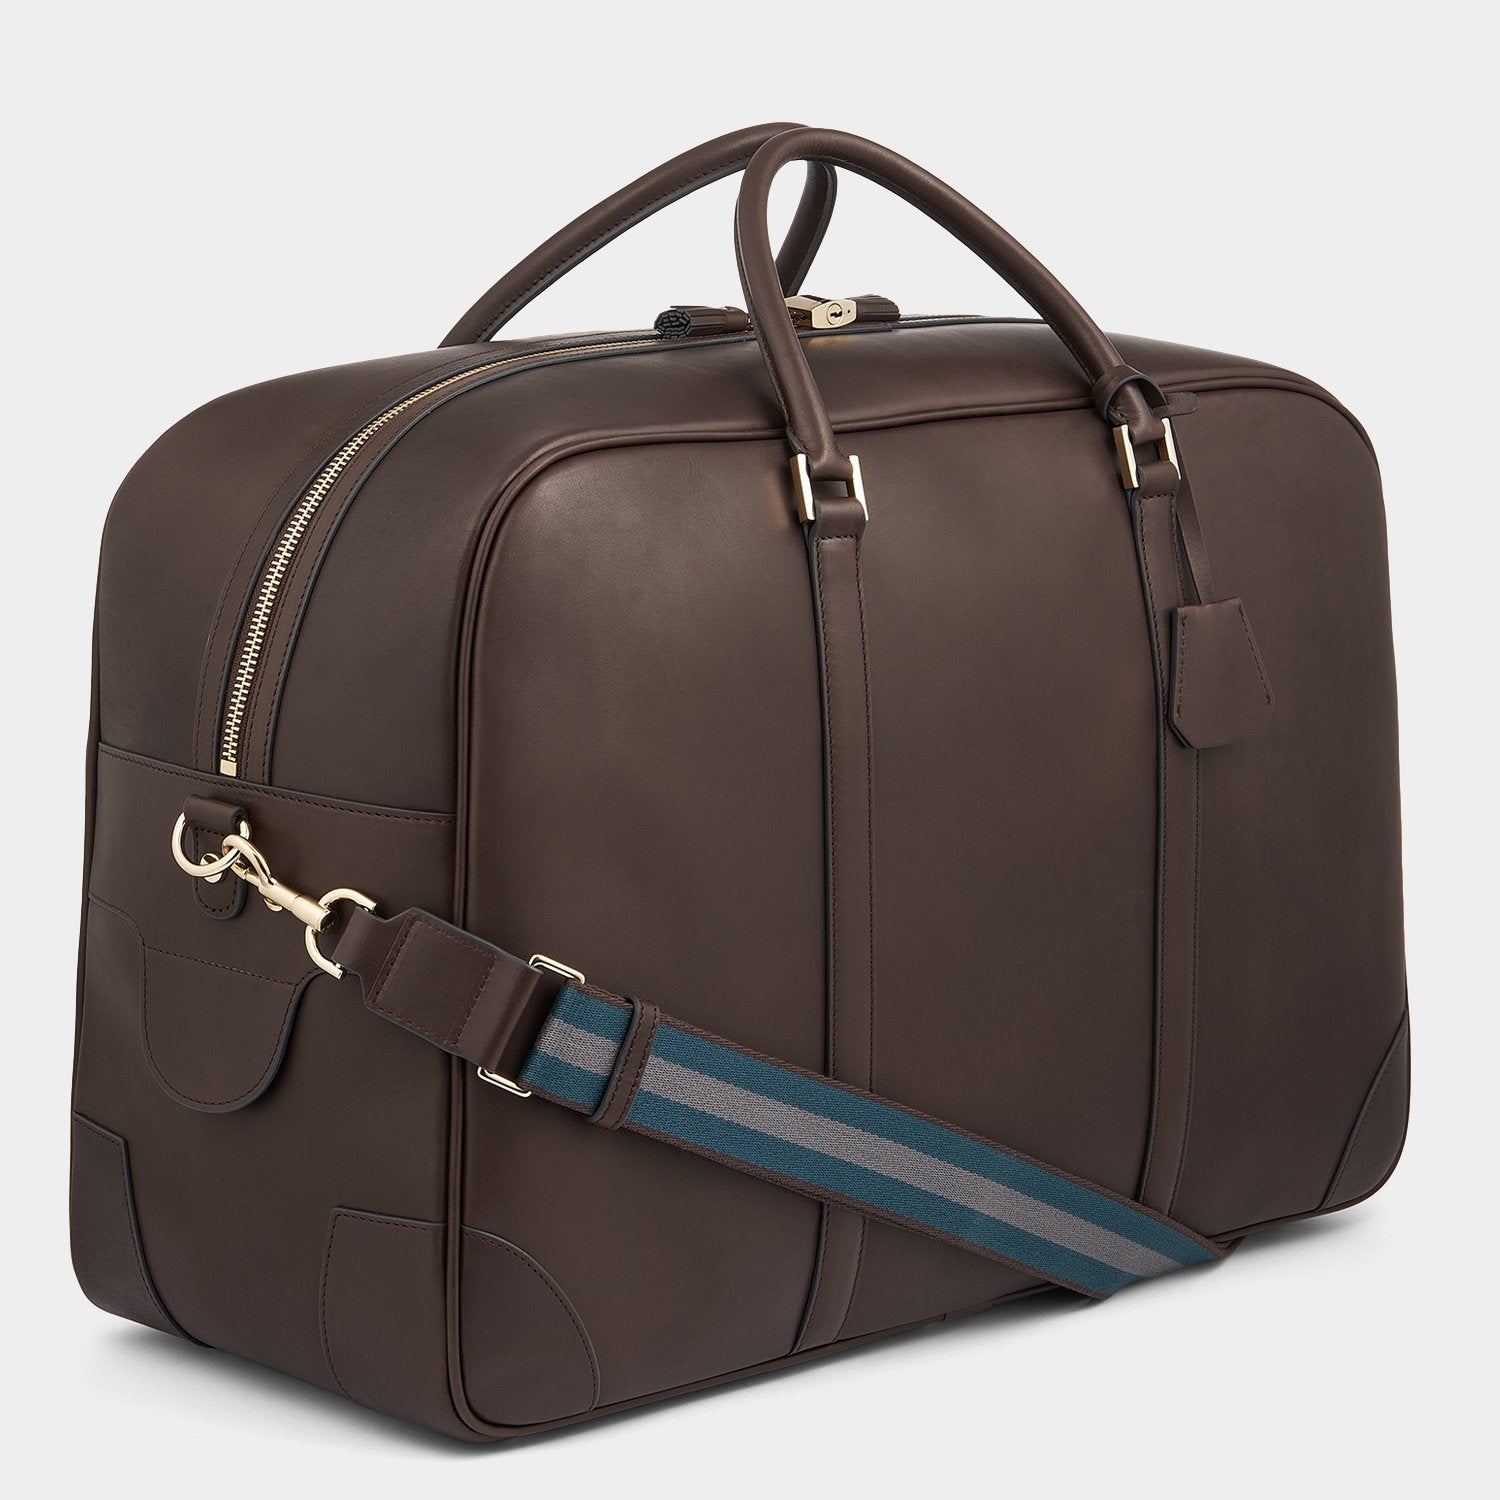 Bespoke Latimer Weekend Bag -

                  
                    Butter Leather in Chocolate -
                  

                  Anya Hindmarch US
